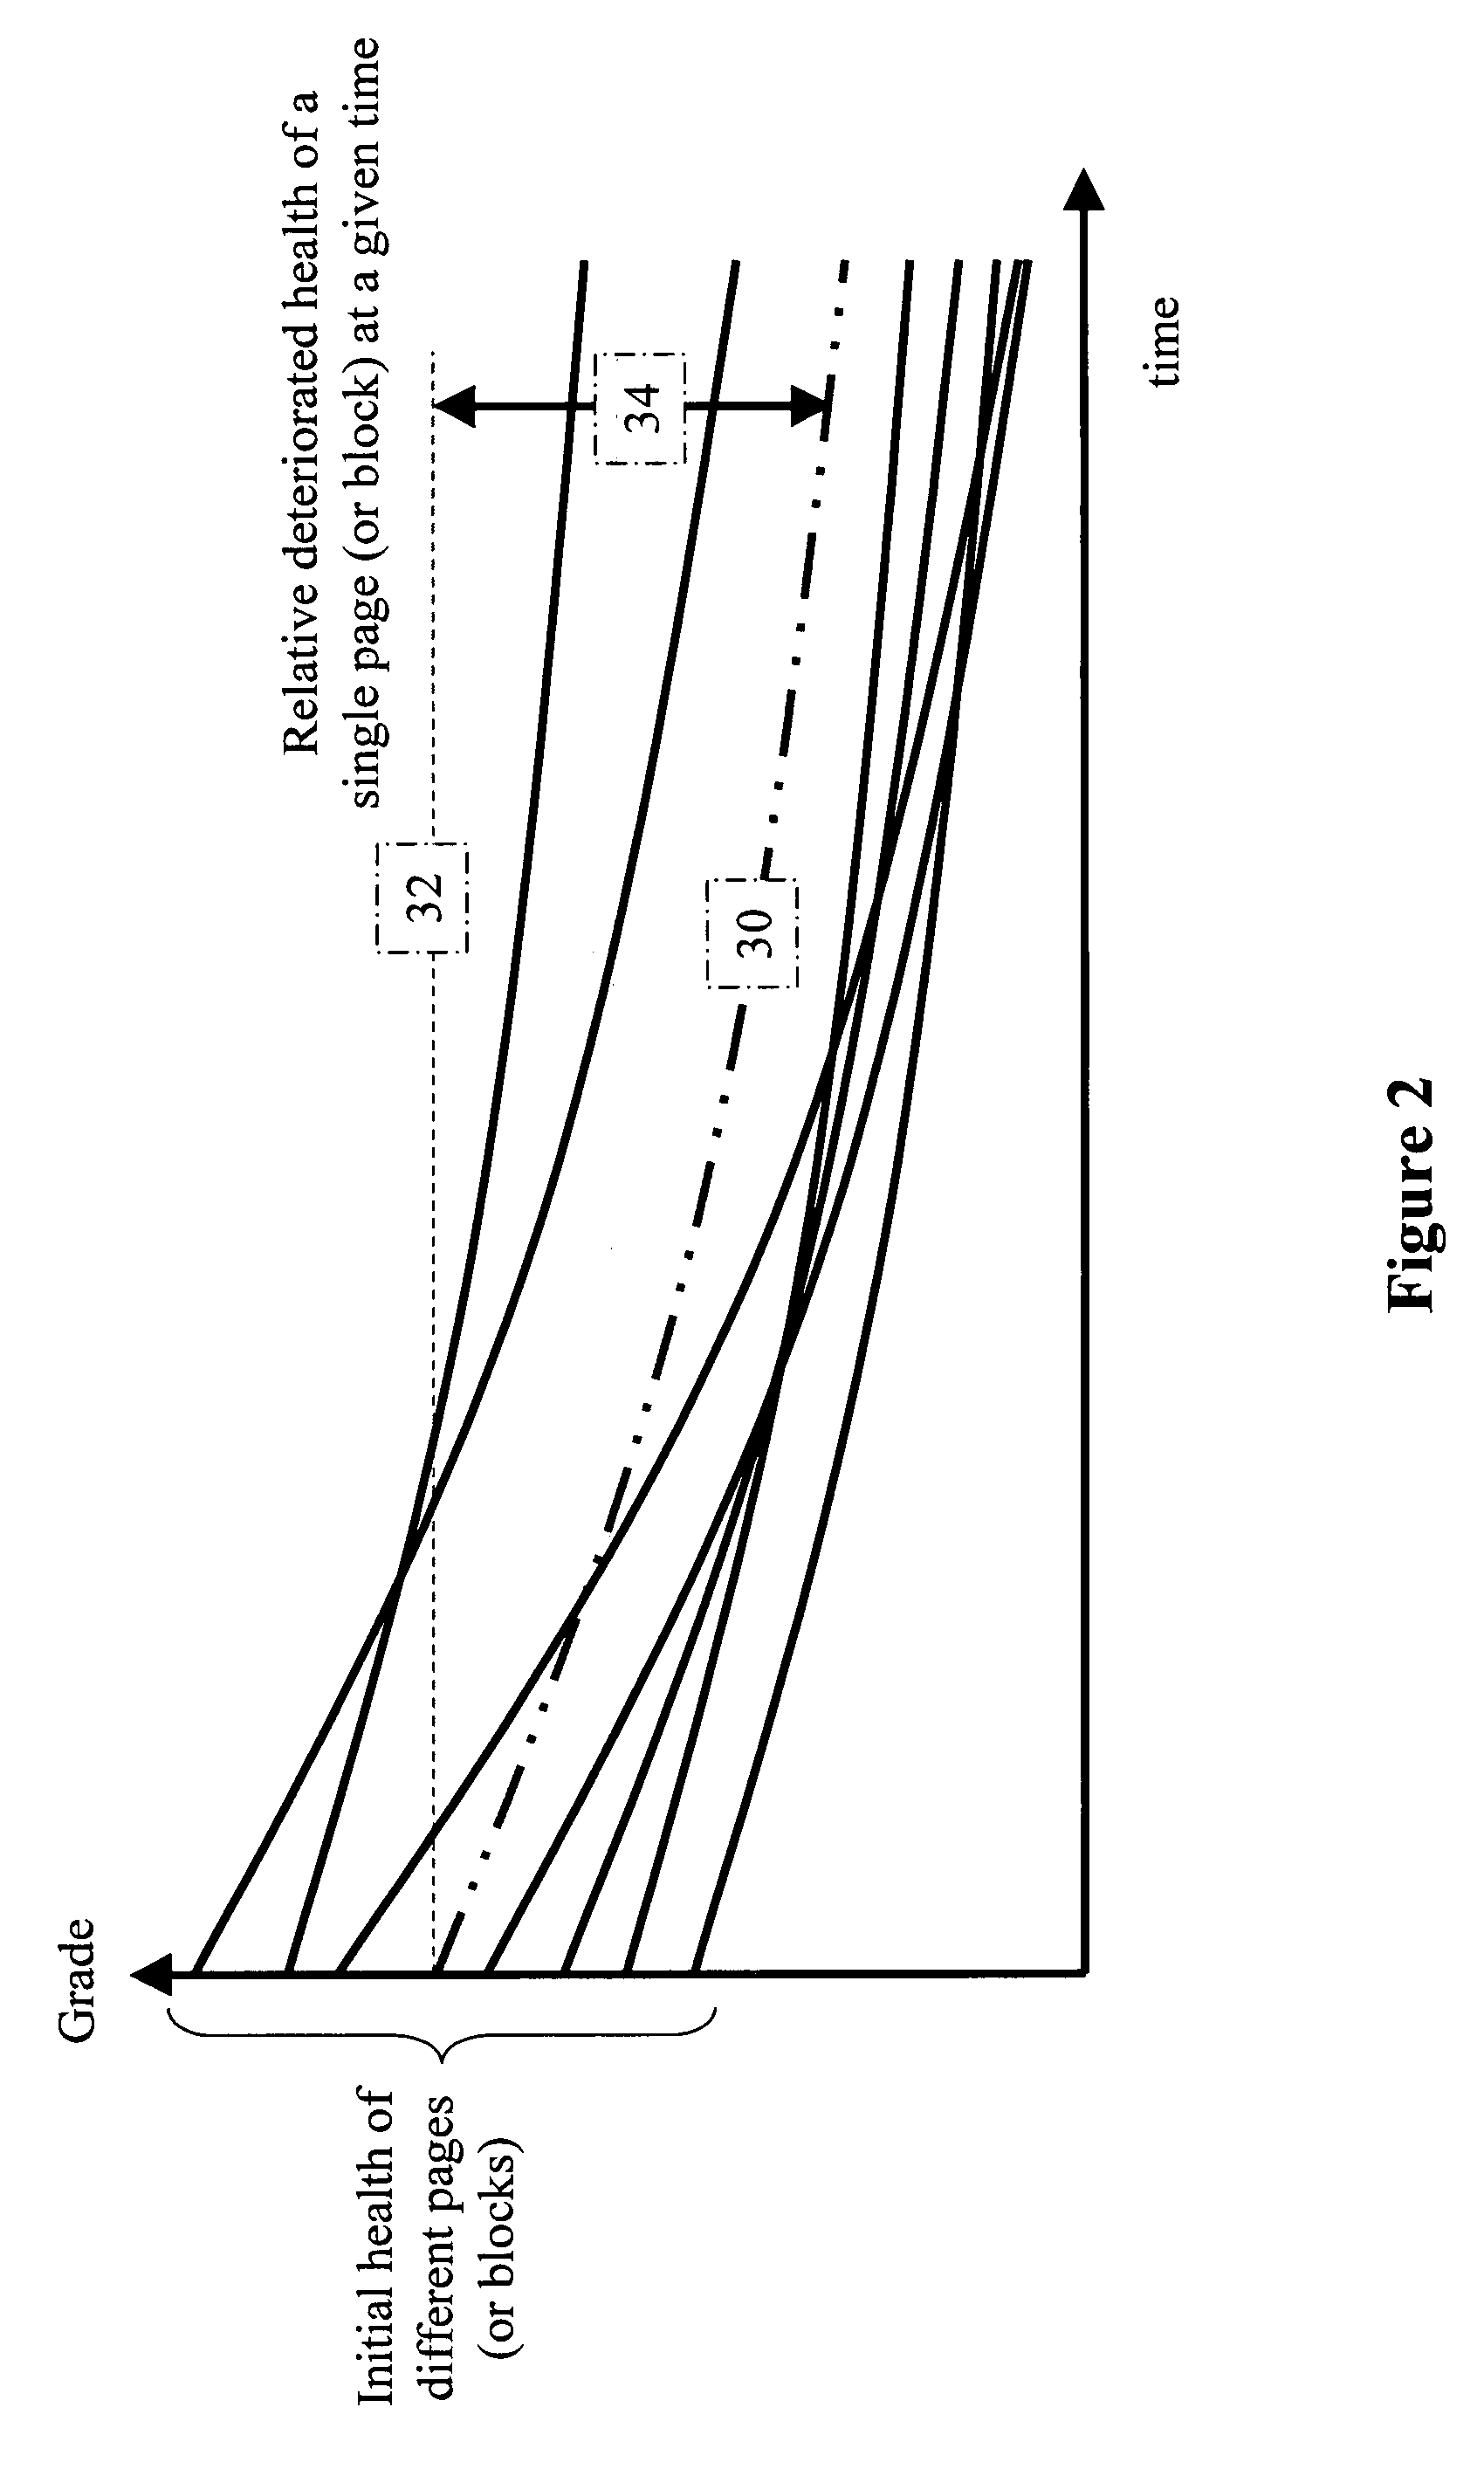 Method for estimating and reporting the life expectancy of flash-disk memory